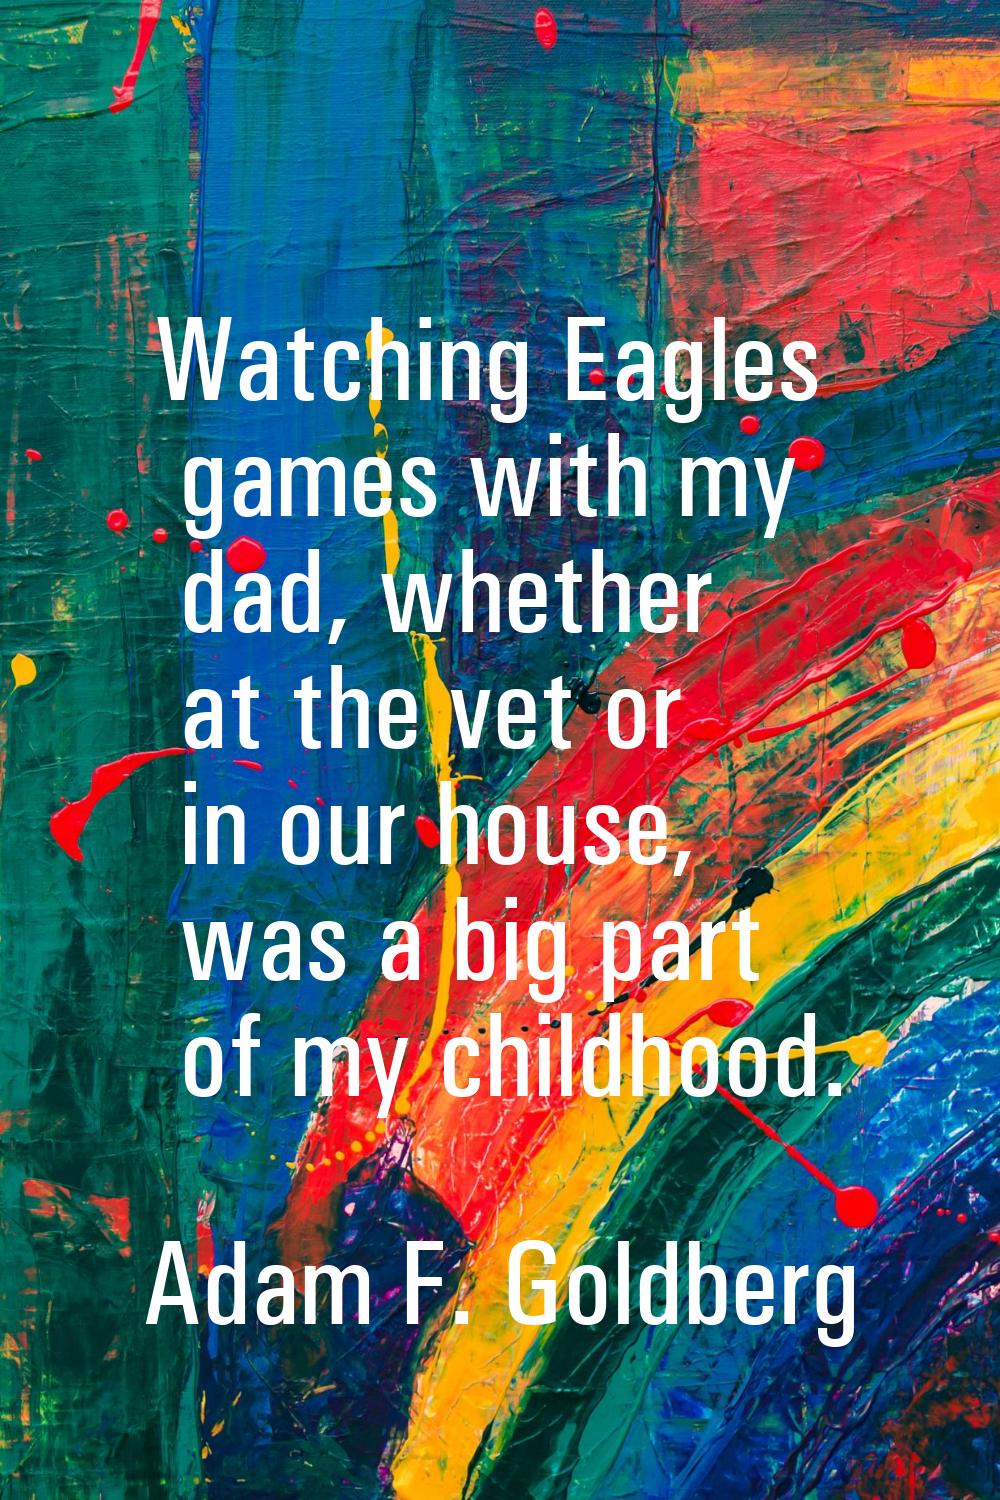 Watching Eagles games with my dad, whether at the vet or in our house, was a big part of my childho